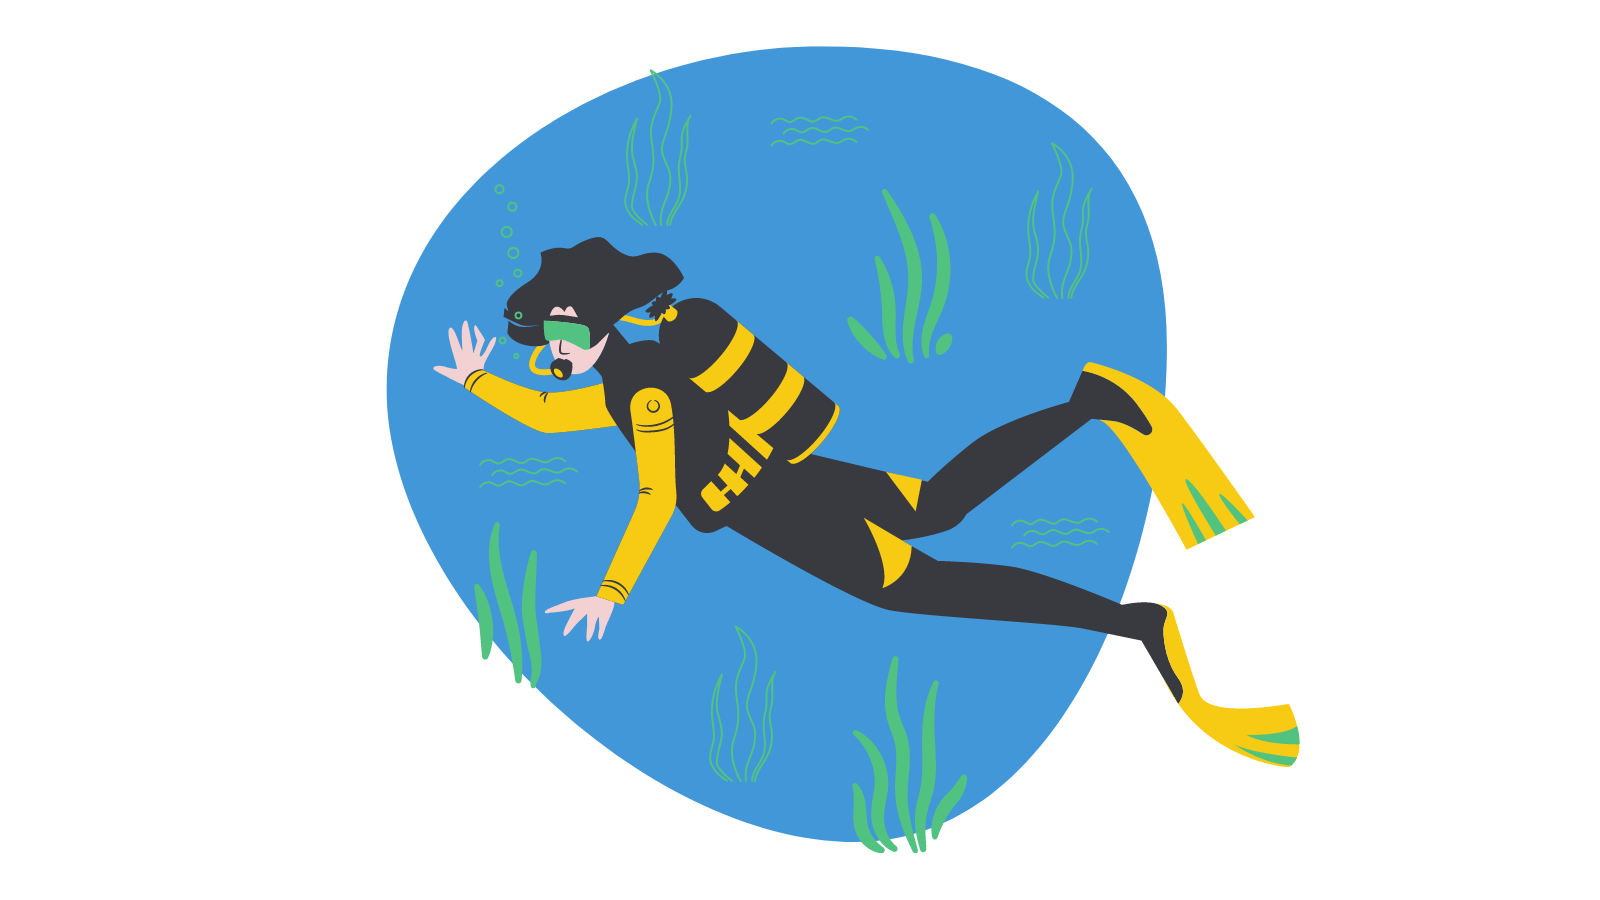 A scuba diver surrounded by seaweed